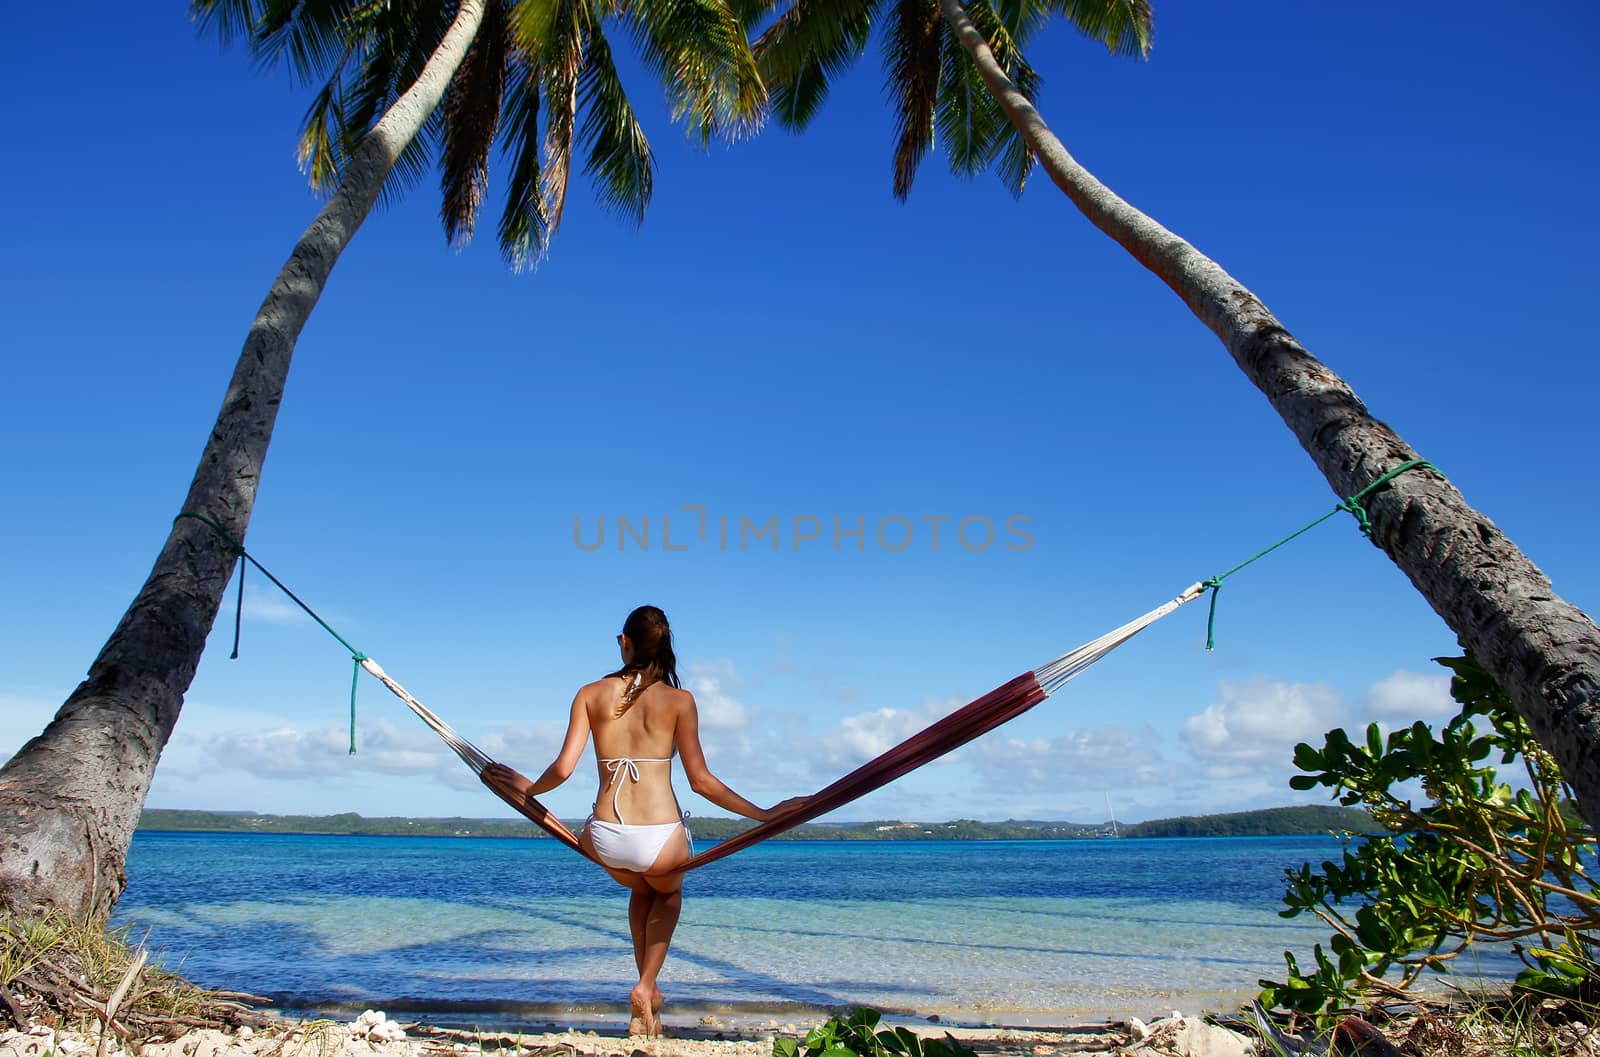 Young woman in bikini sitting in a hammock between palm trees, O by donya_nedomam